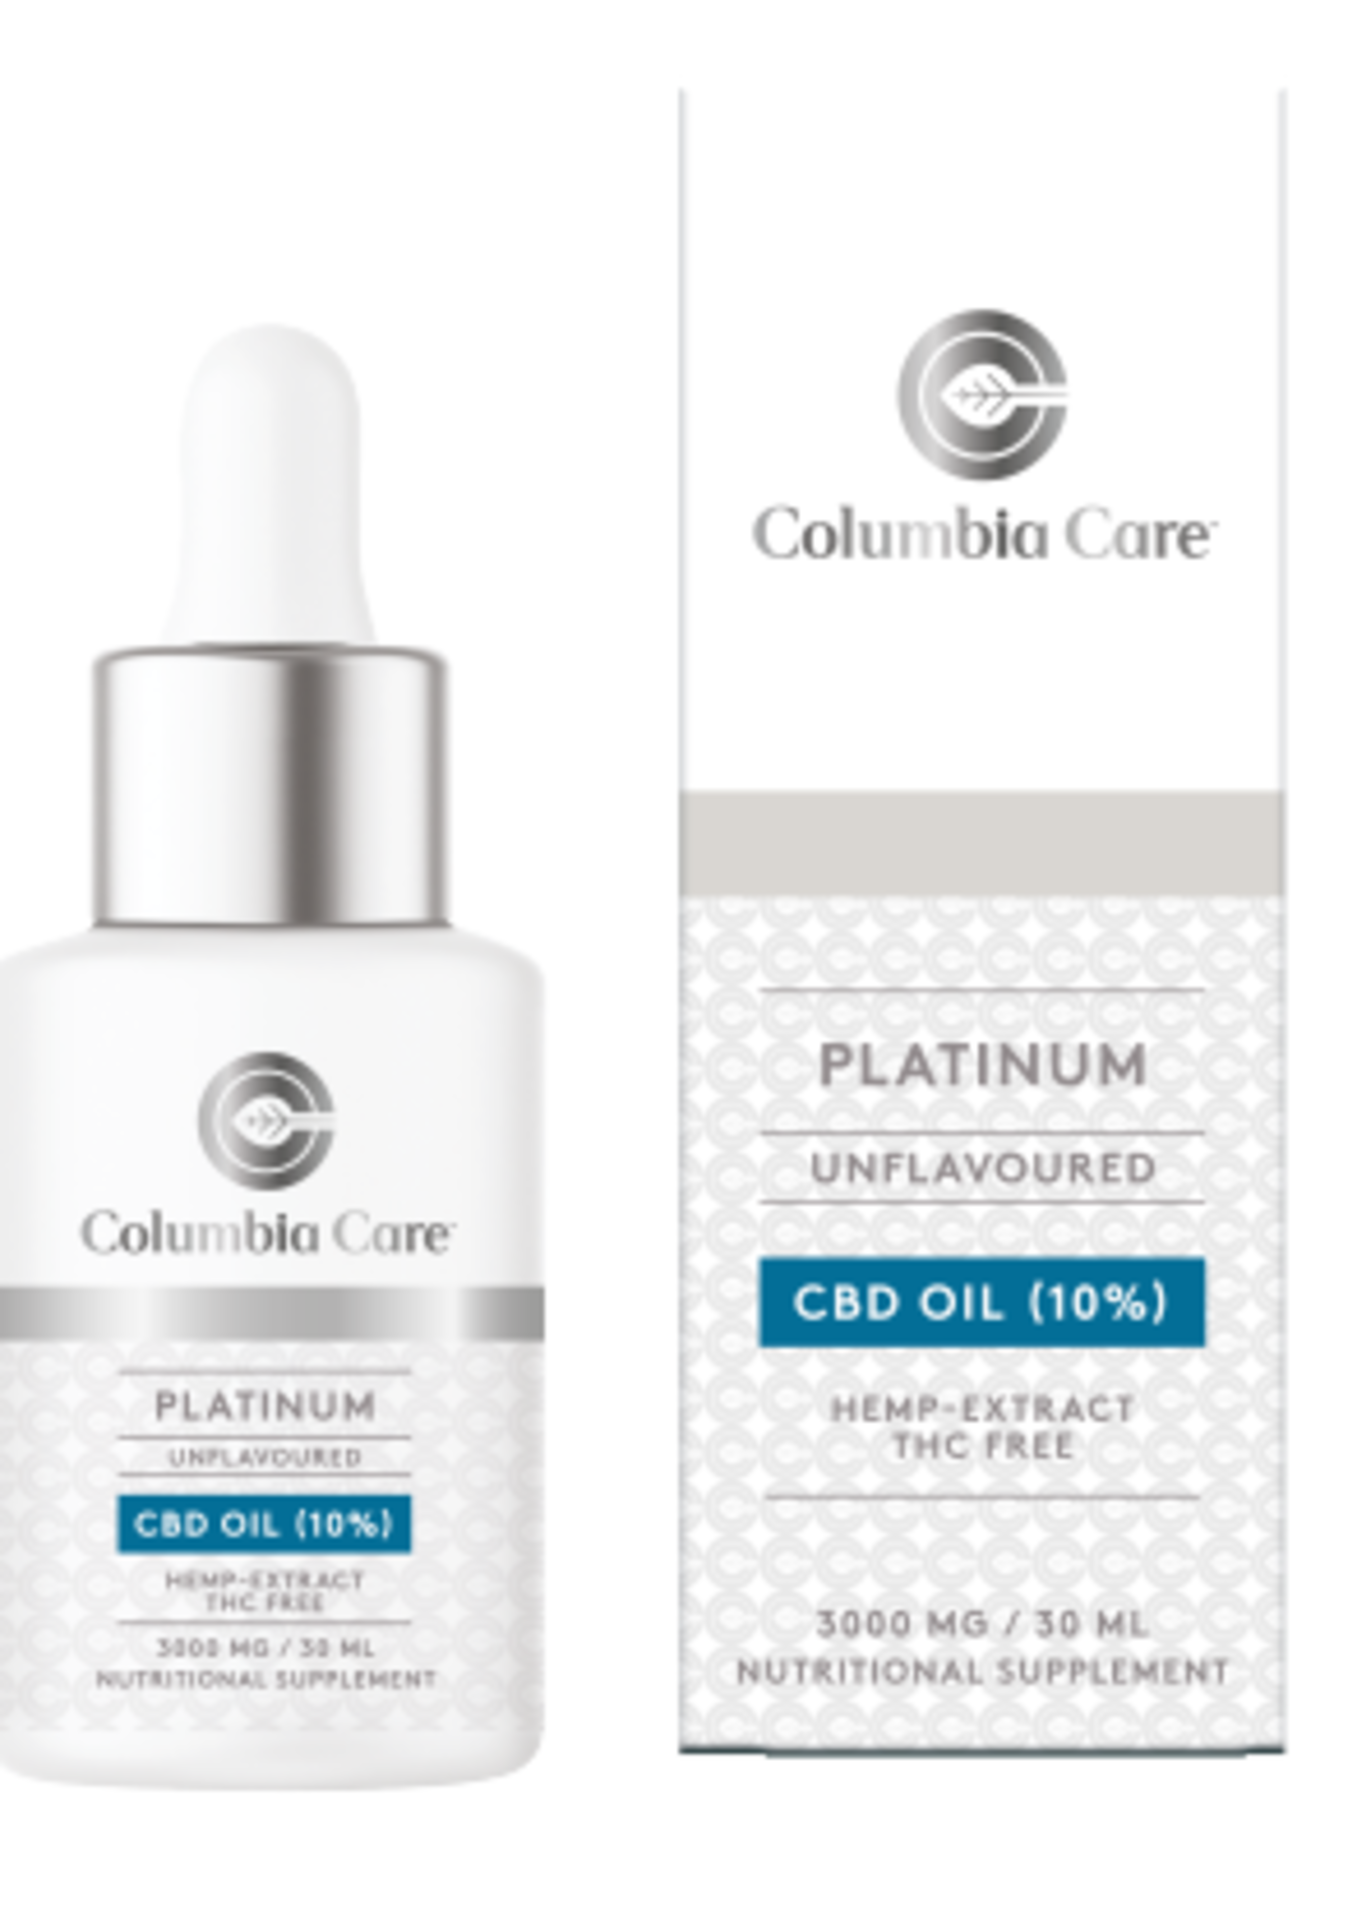 2 x Brand New Columbia Care Platinum Unflavoured Flavored Tincture 30ml 3000mg. Columbia Care, a